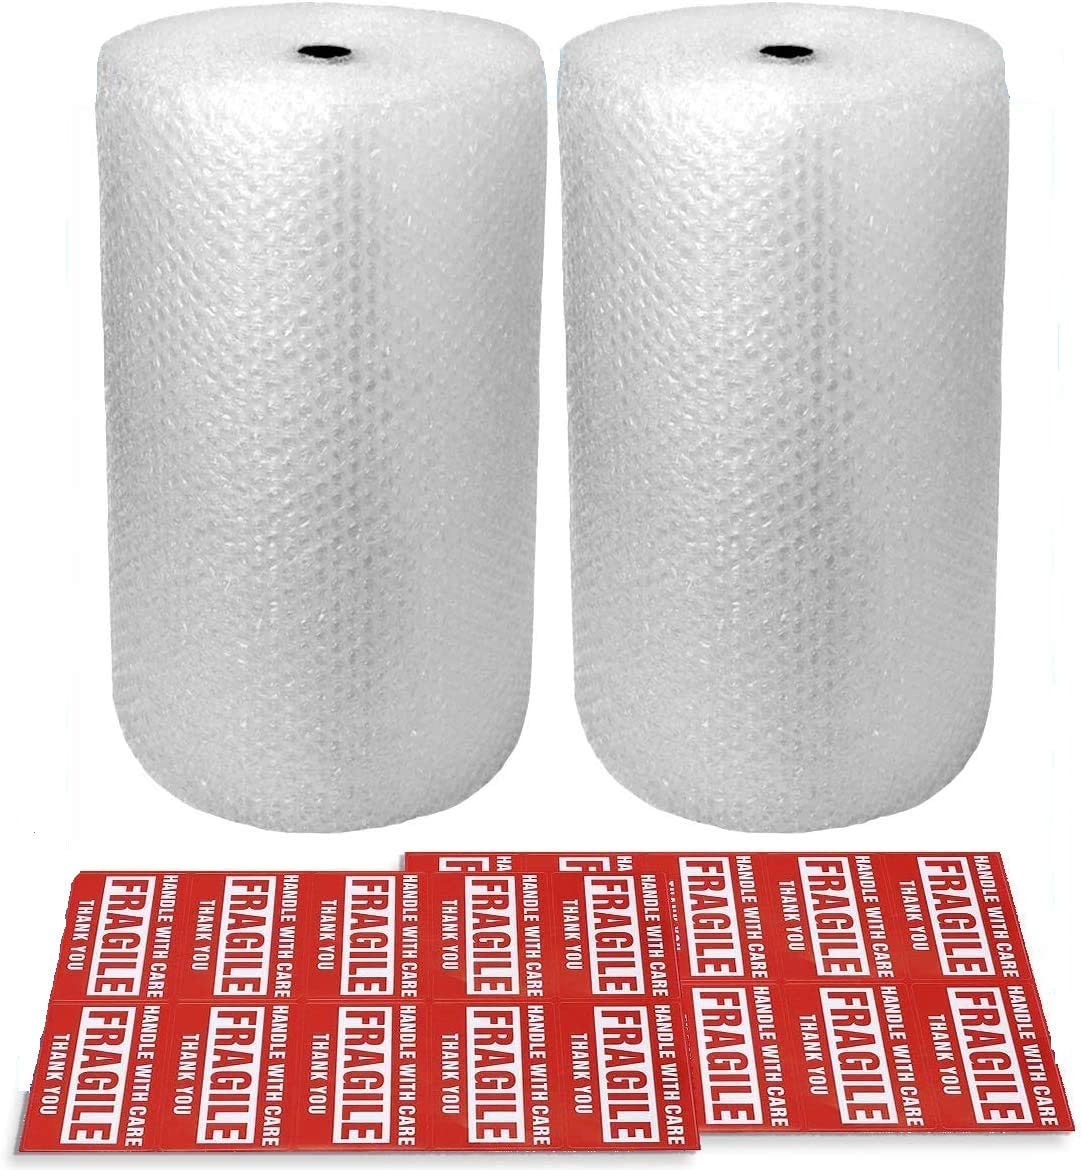 Pacific Mailer Bubble Wrap & Stickers Moving Supplies, 2-Piece